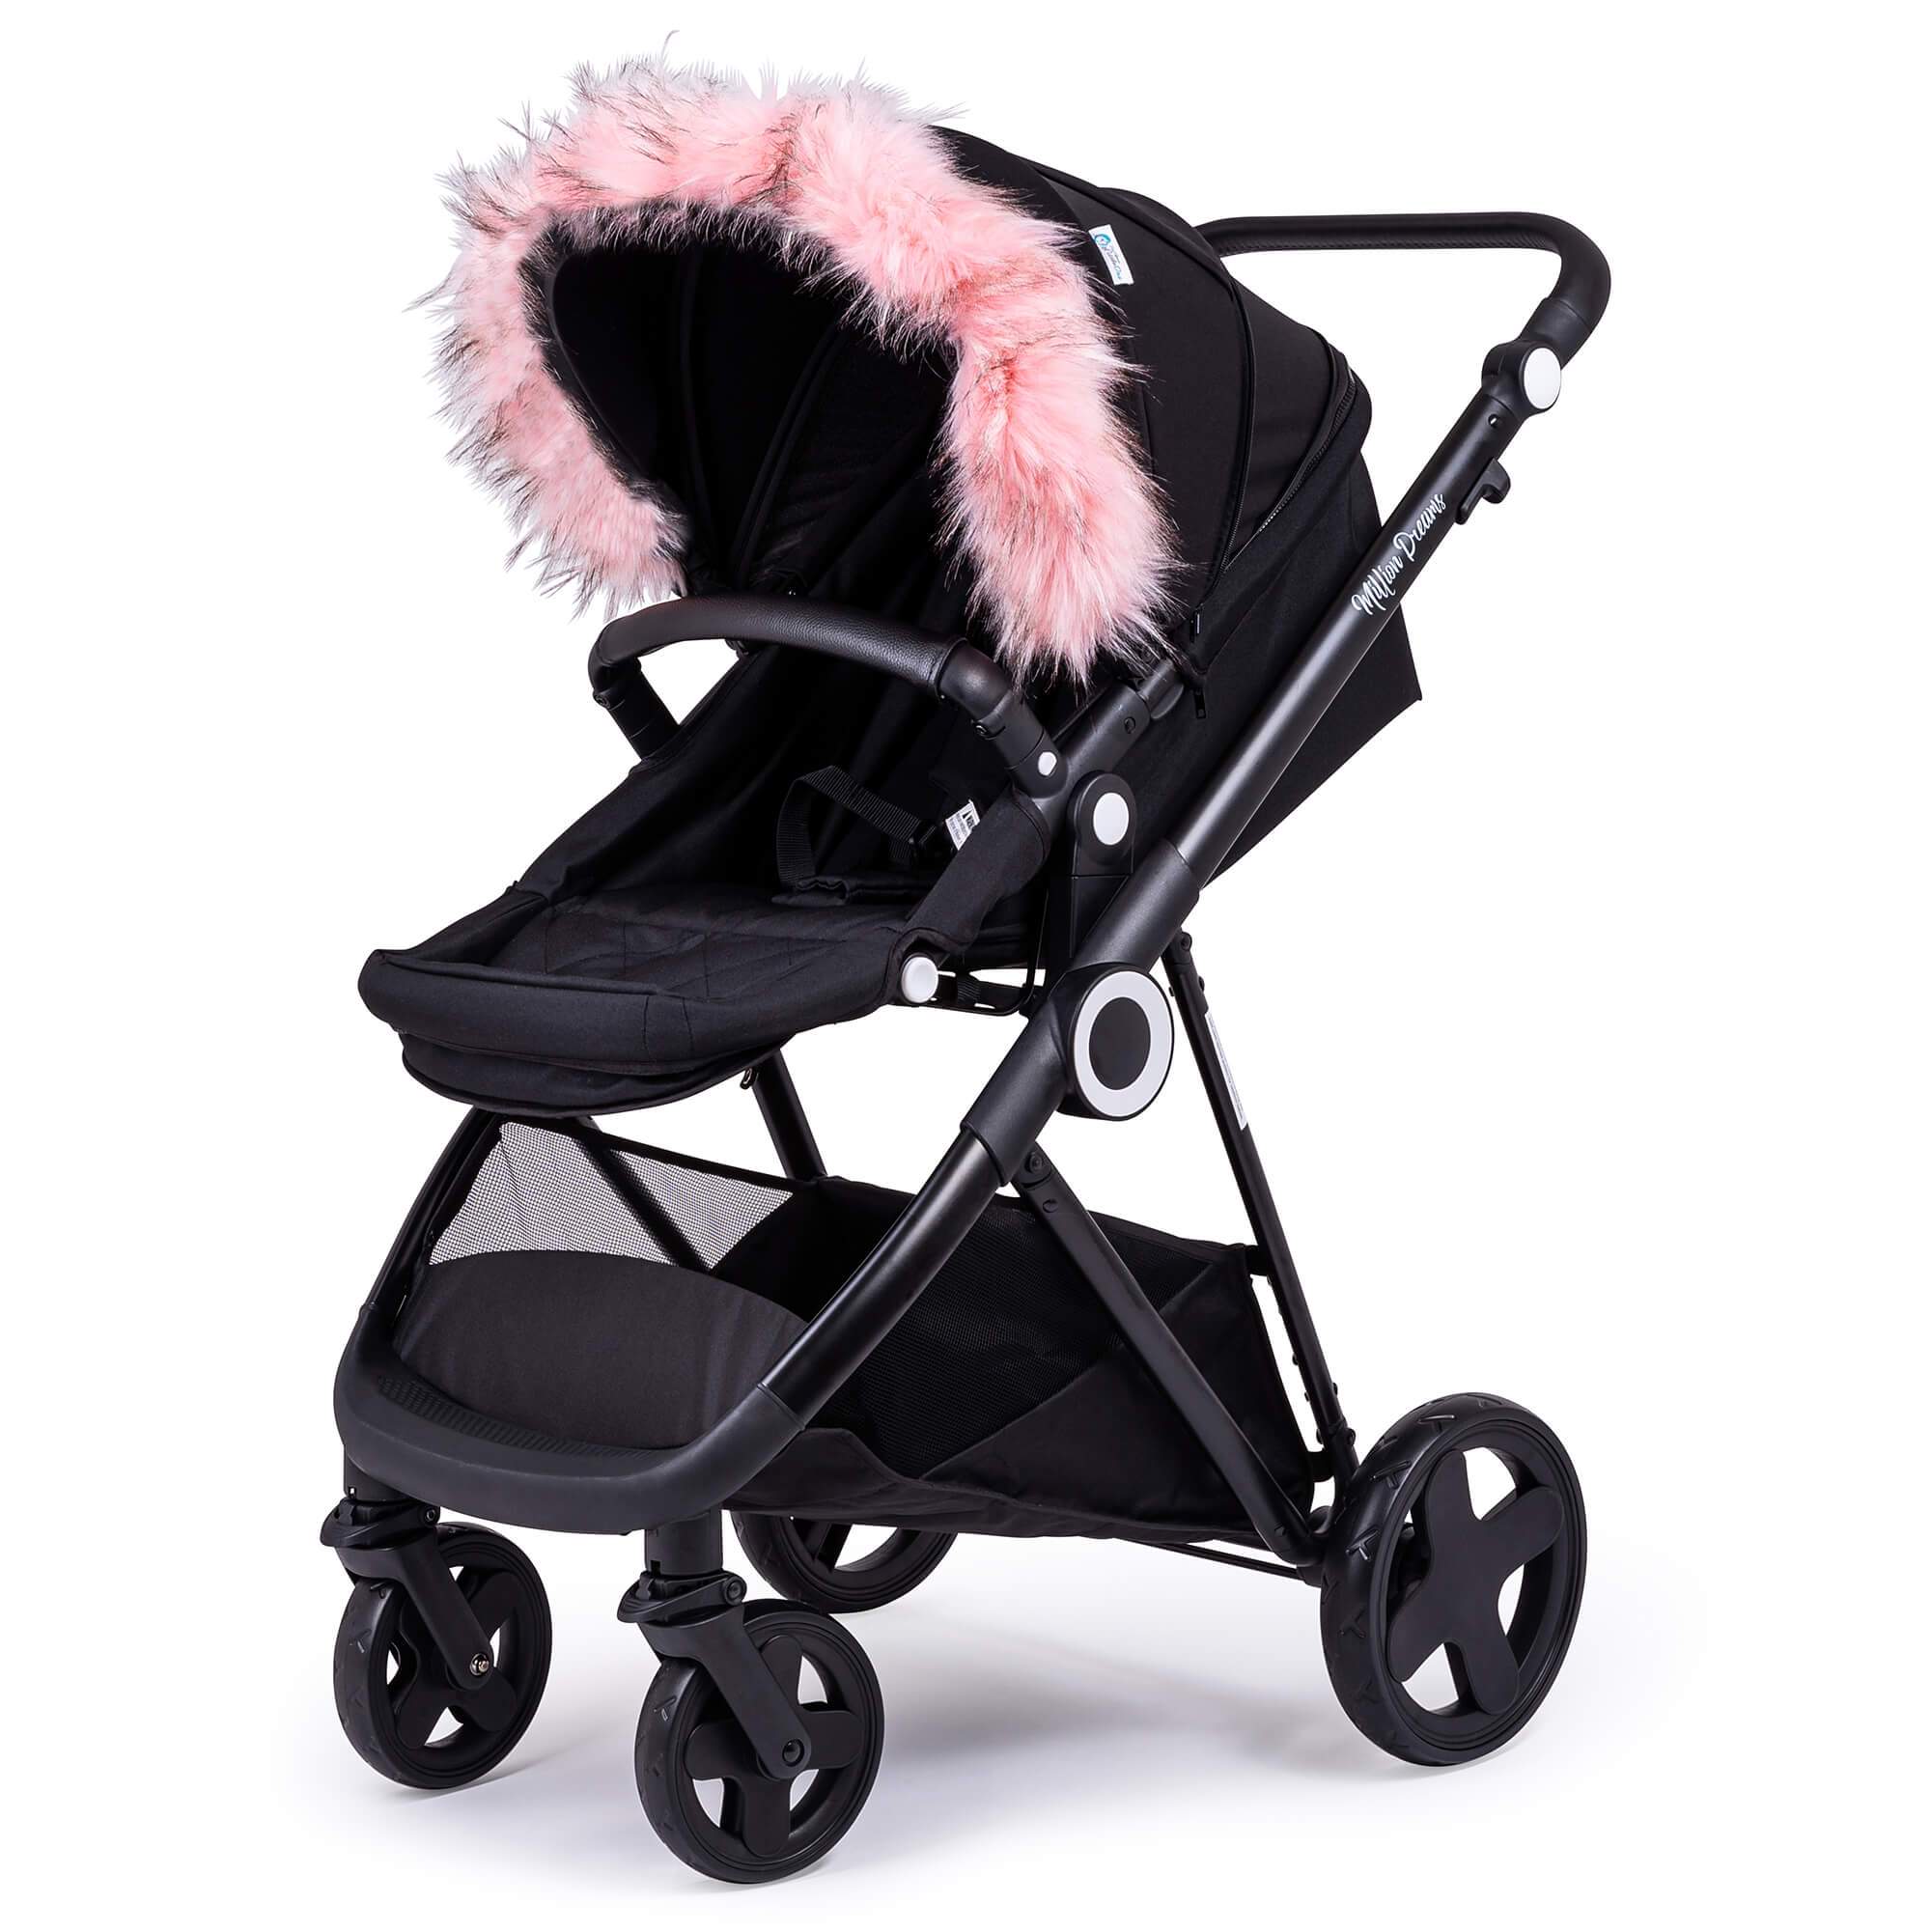 Pram Fur Hood Trim Attachment for Pushchair Compatible with Gesslein - Light Pink / Fits All Models | For Your Little One